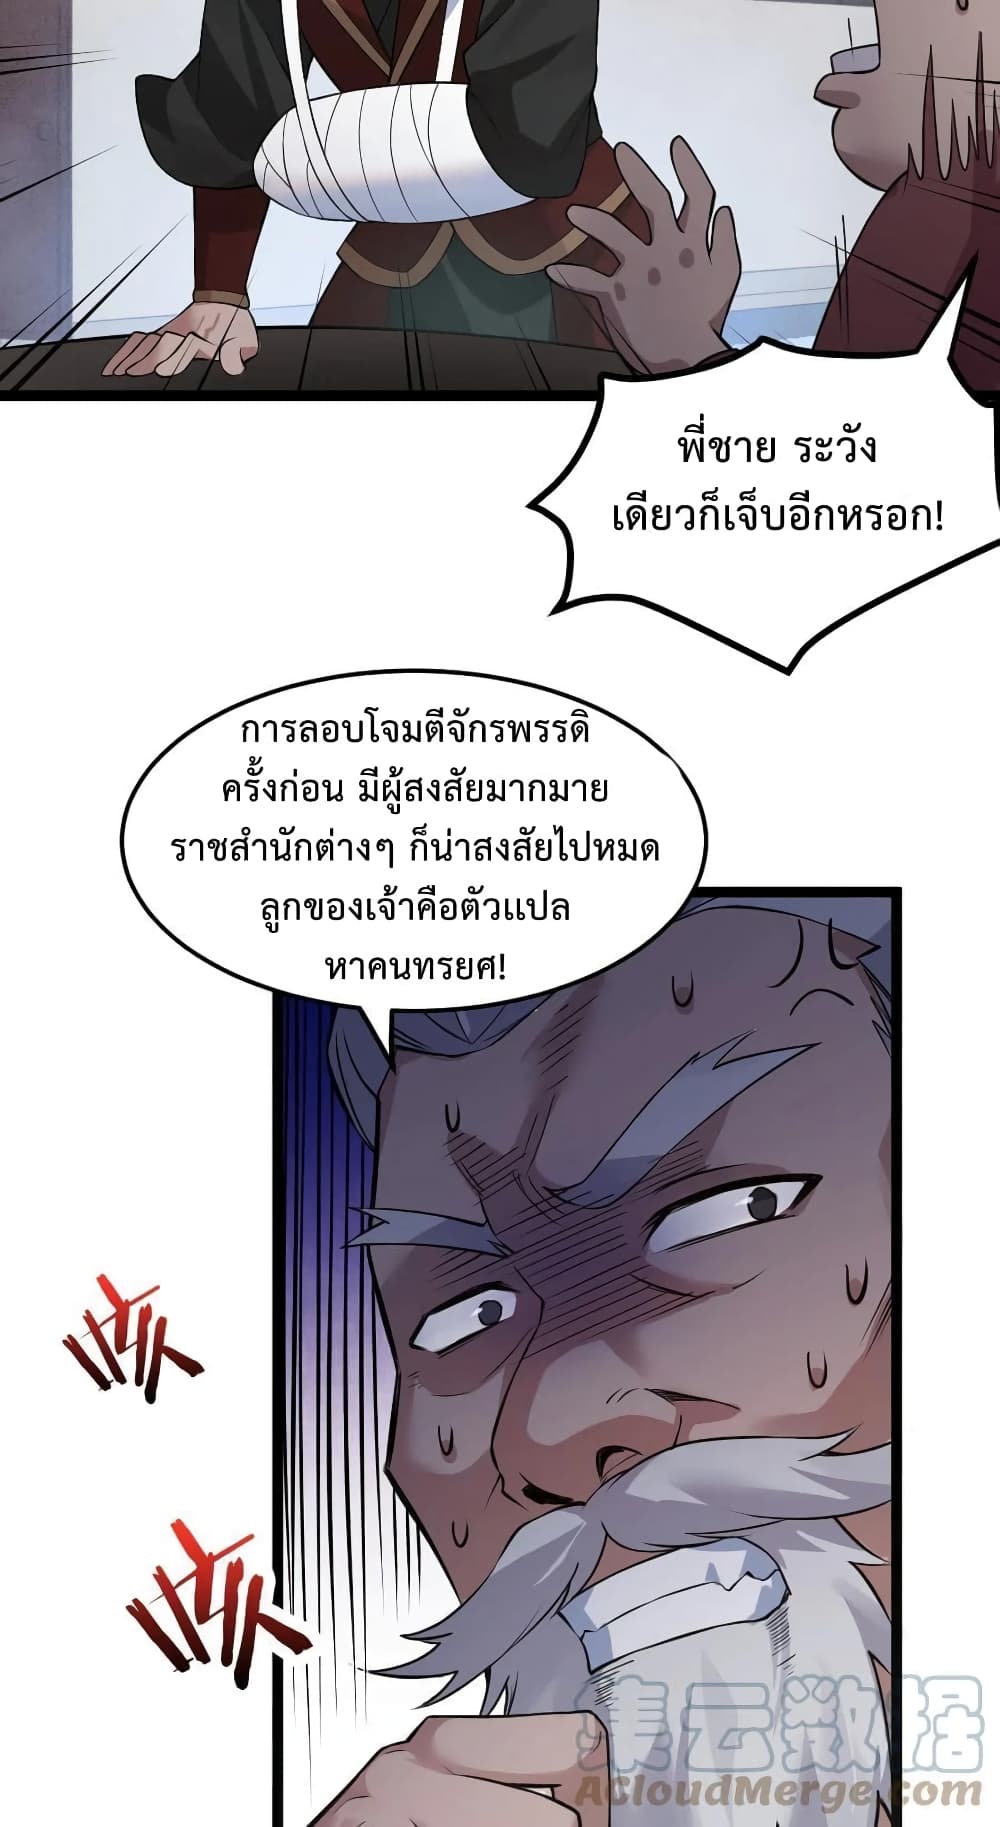 Godsian Masian from Another World ตอนที่ 97 (18)